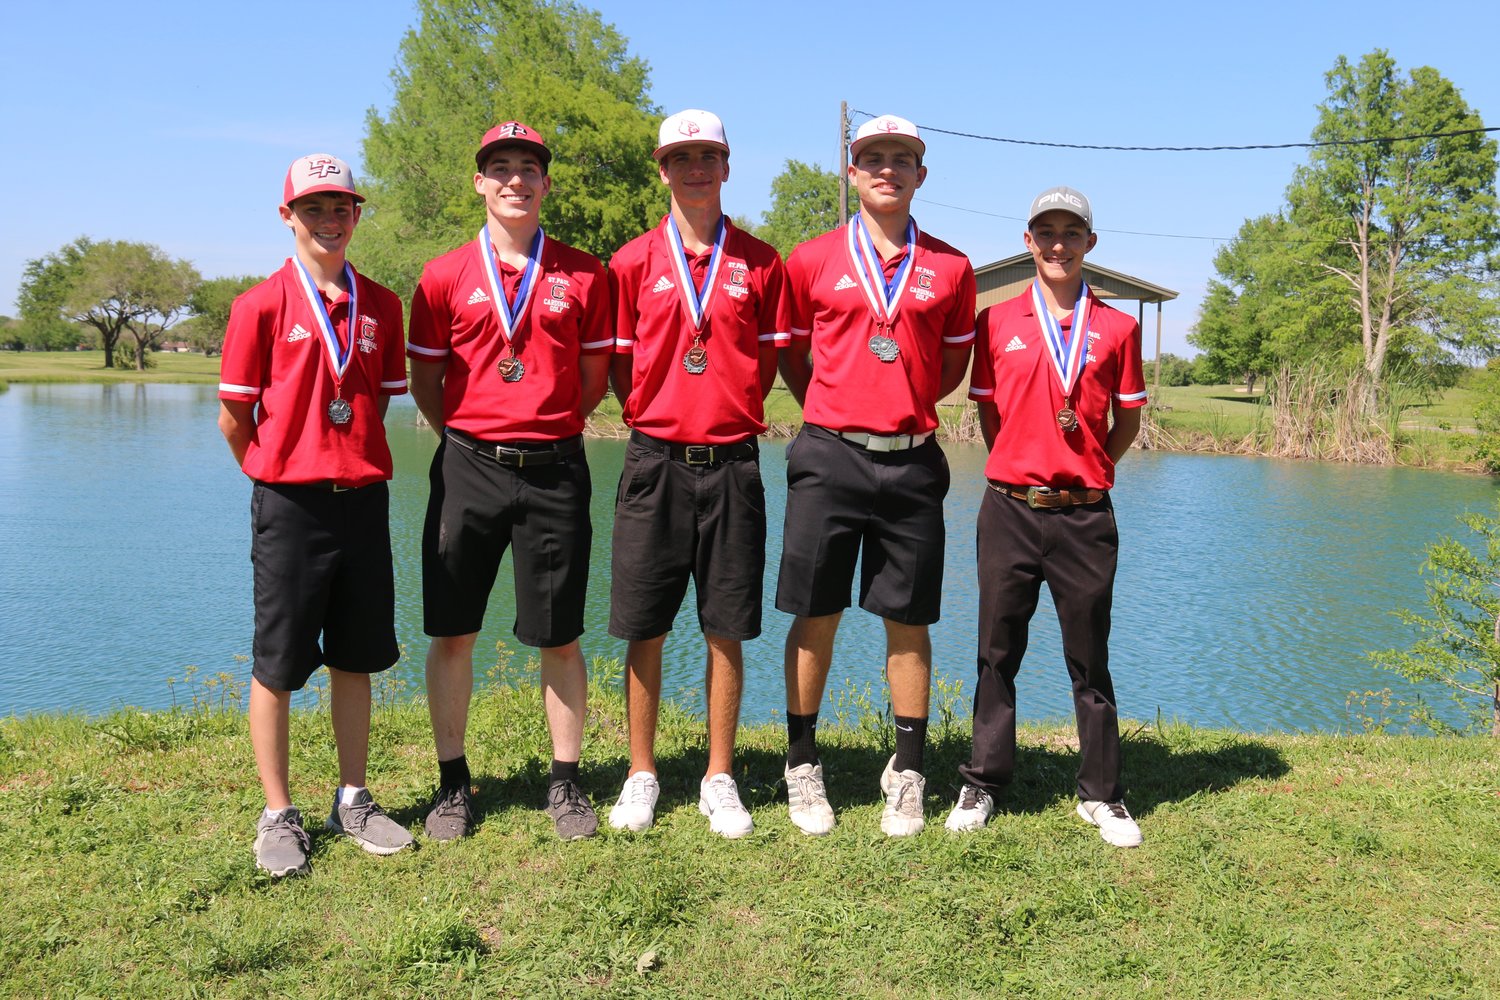 On the boys team are (from left) Braden Clampit, Carson Reese, Walker Jackson, Cole Brown and Cody Hollenbach.